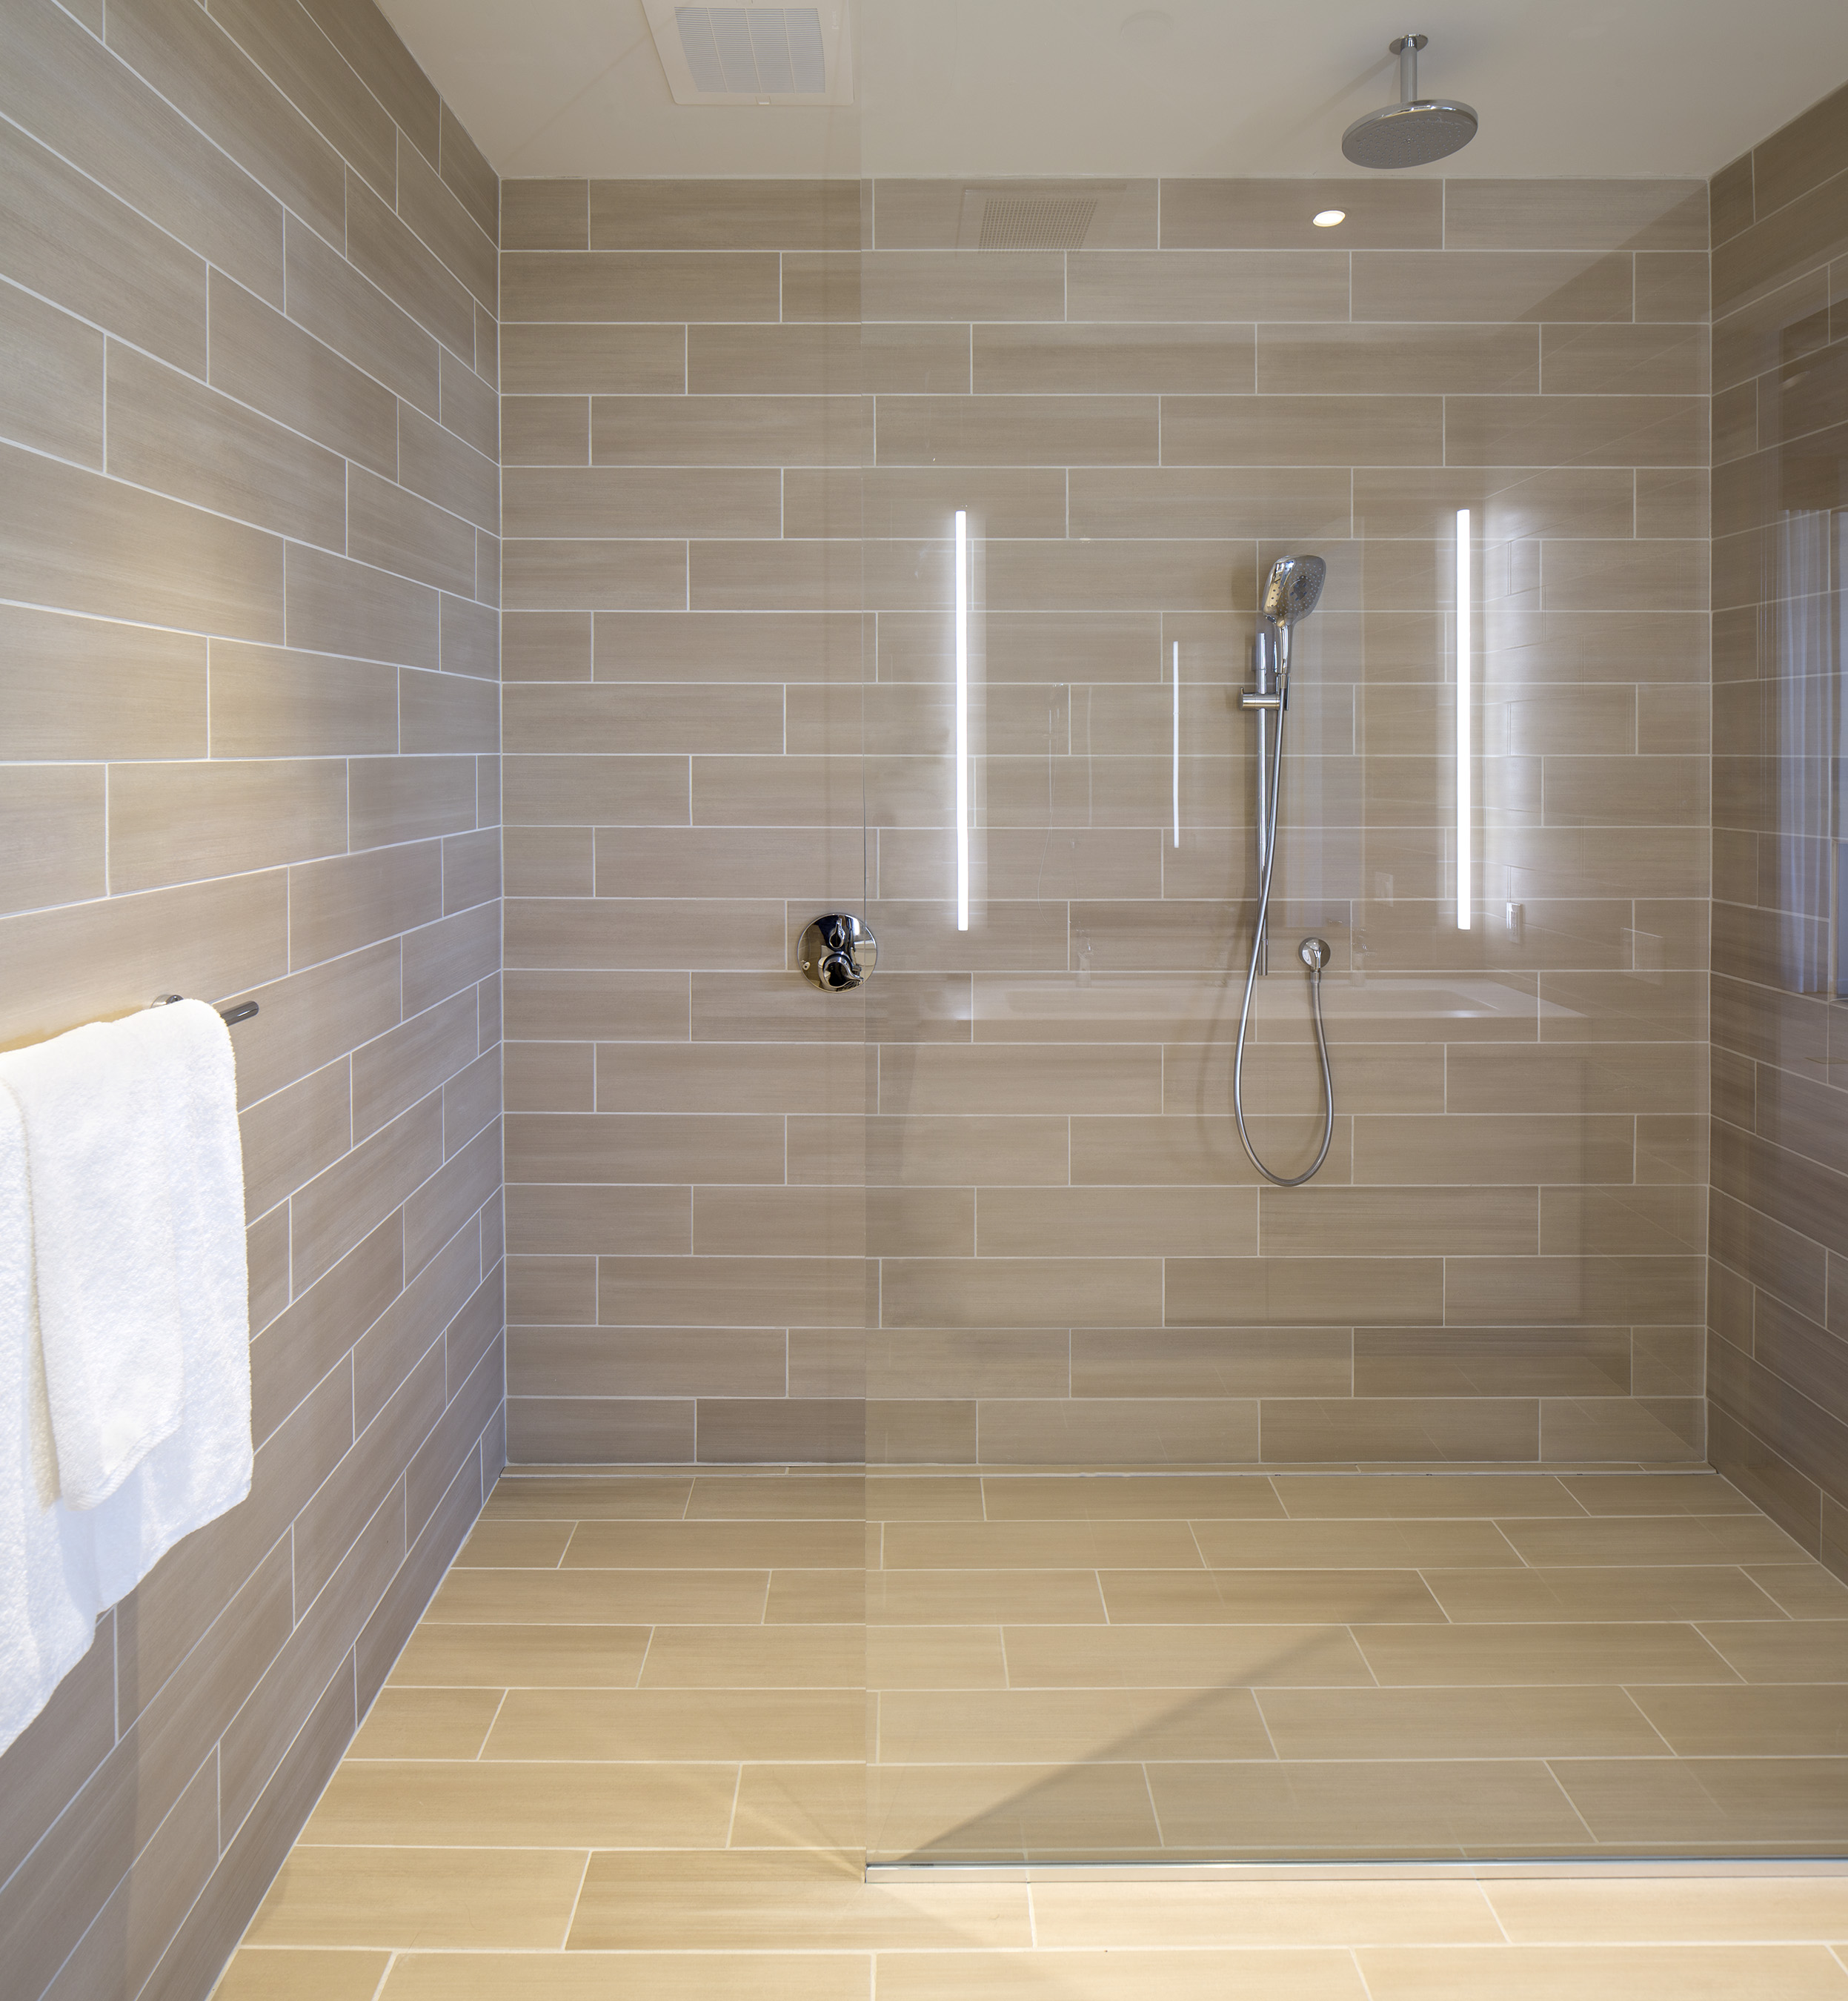 The modern bathroom offers a luxurious, open-design shower with rainfall shower head that delivers a truly spa-like experience.